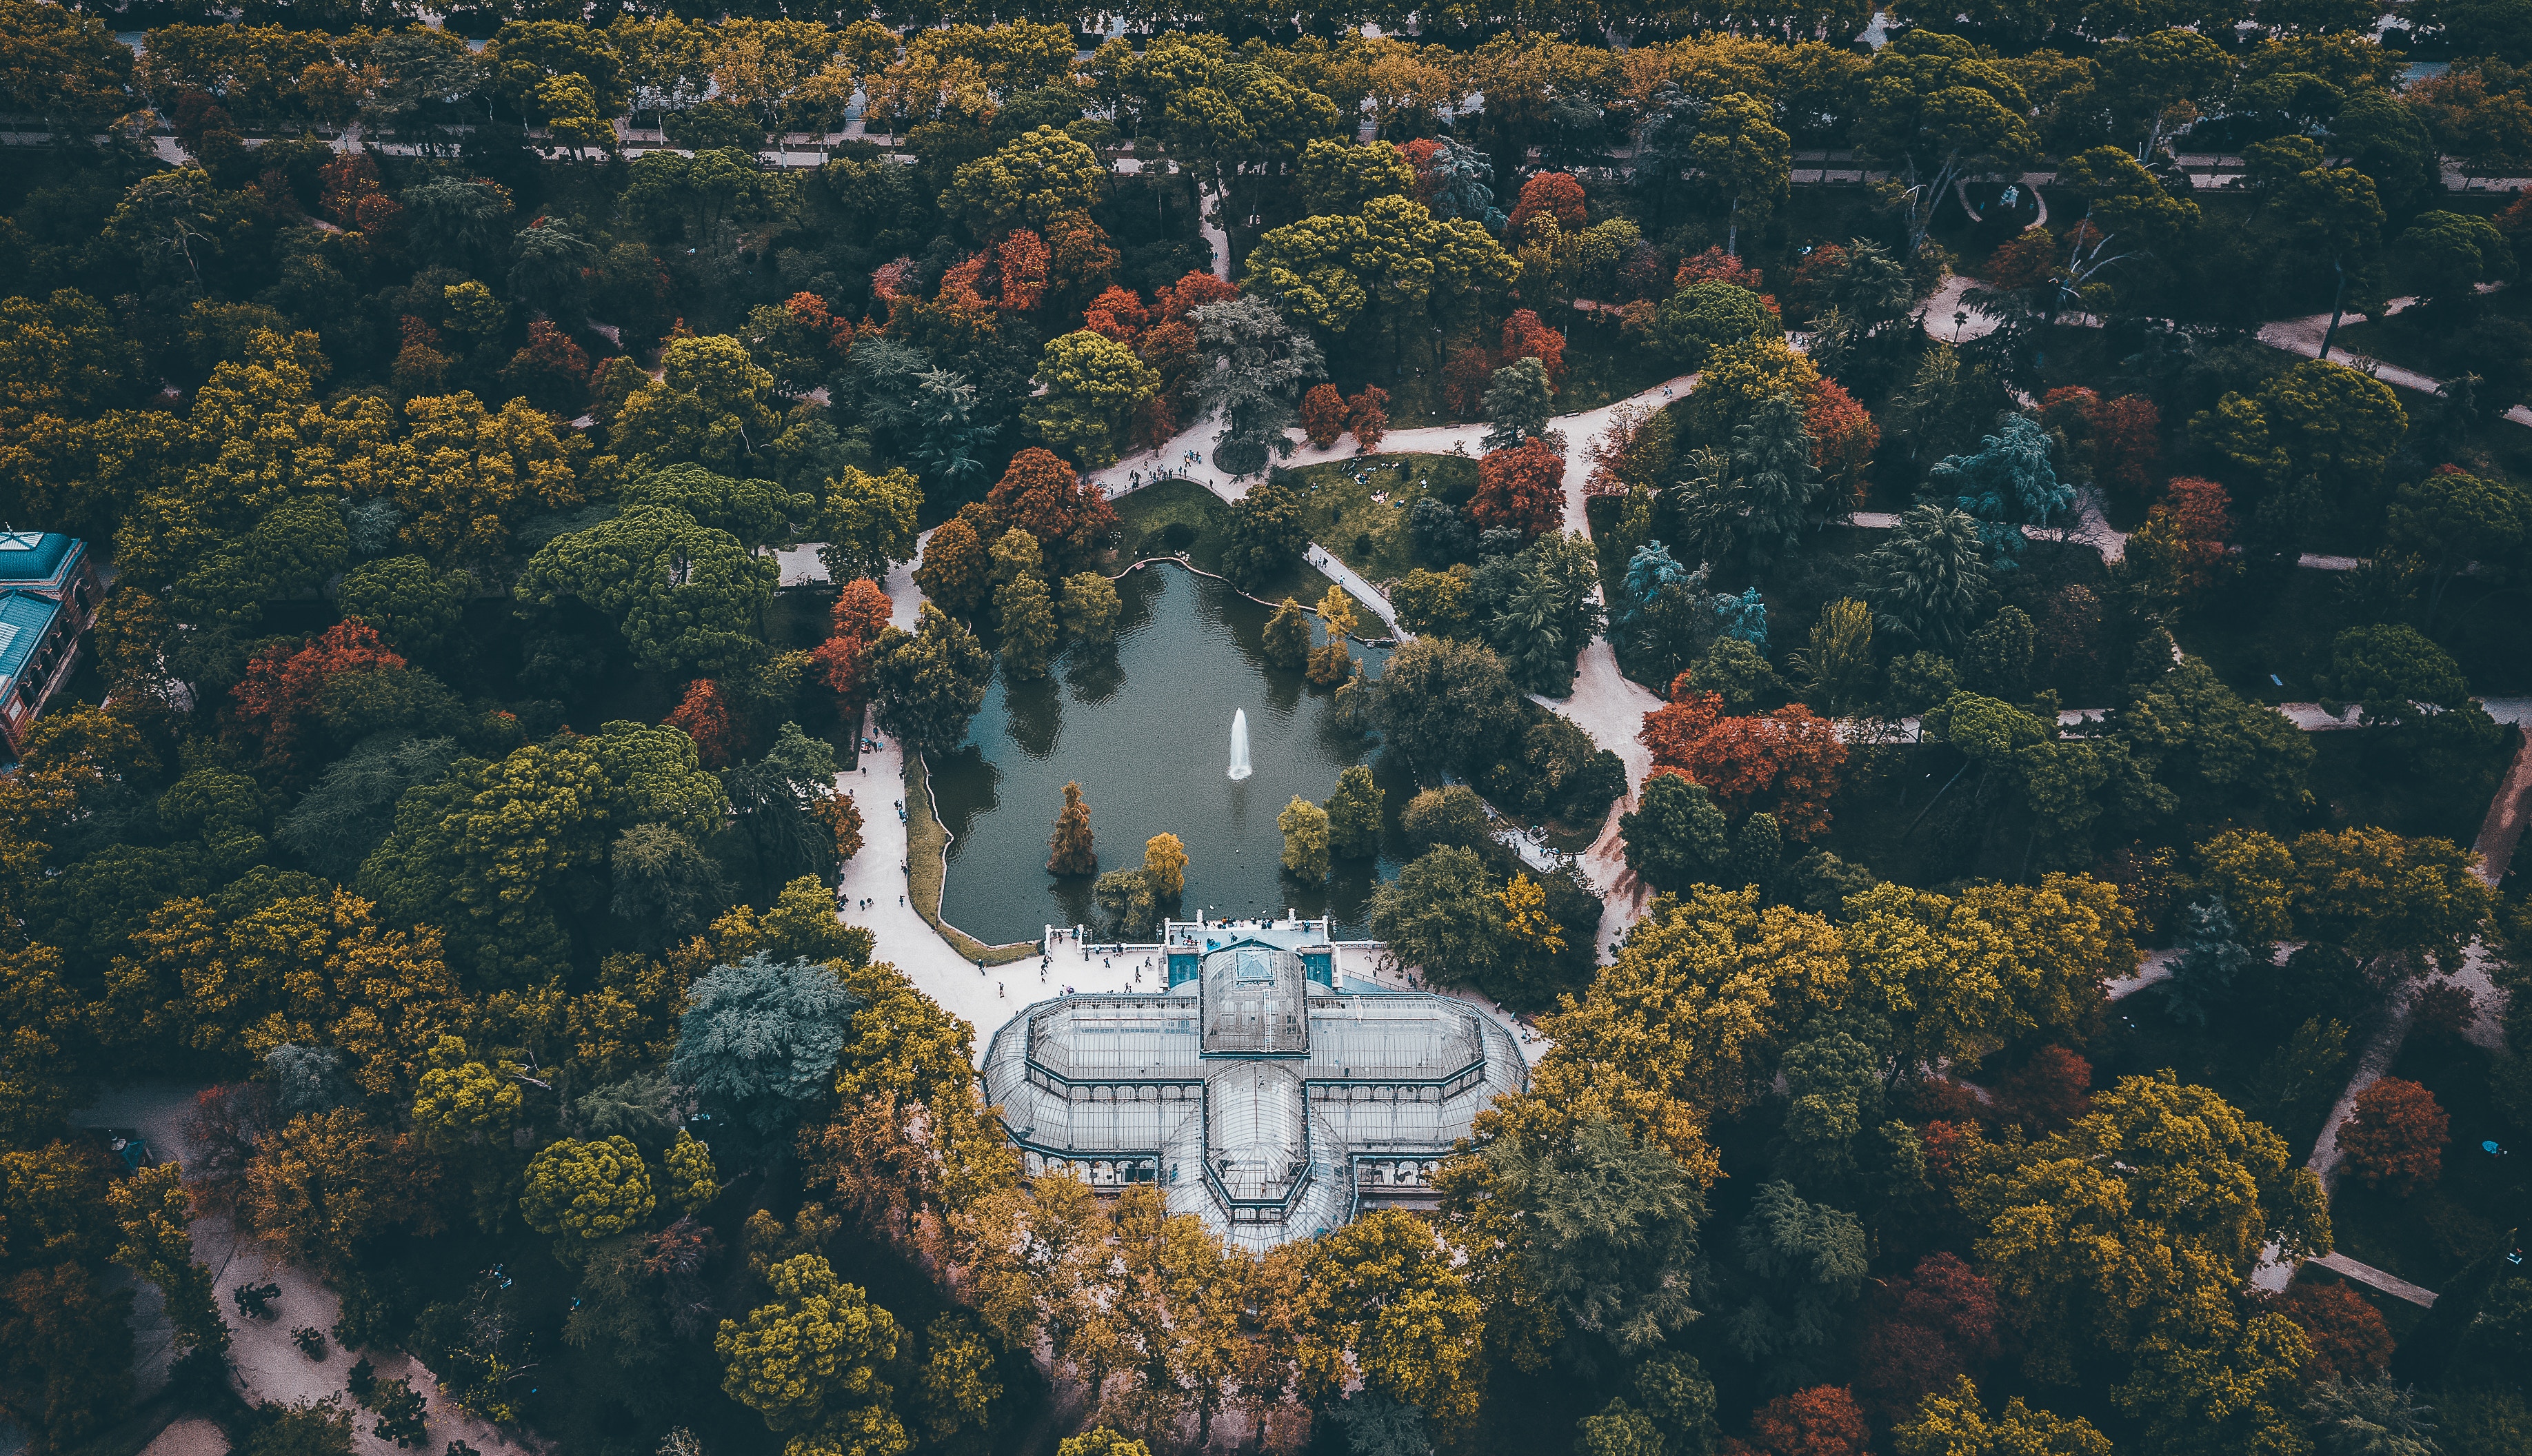 madrid, spain, landscape, cities, trees, architecture, view from above, palace Free Stock Photo